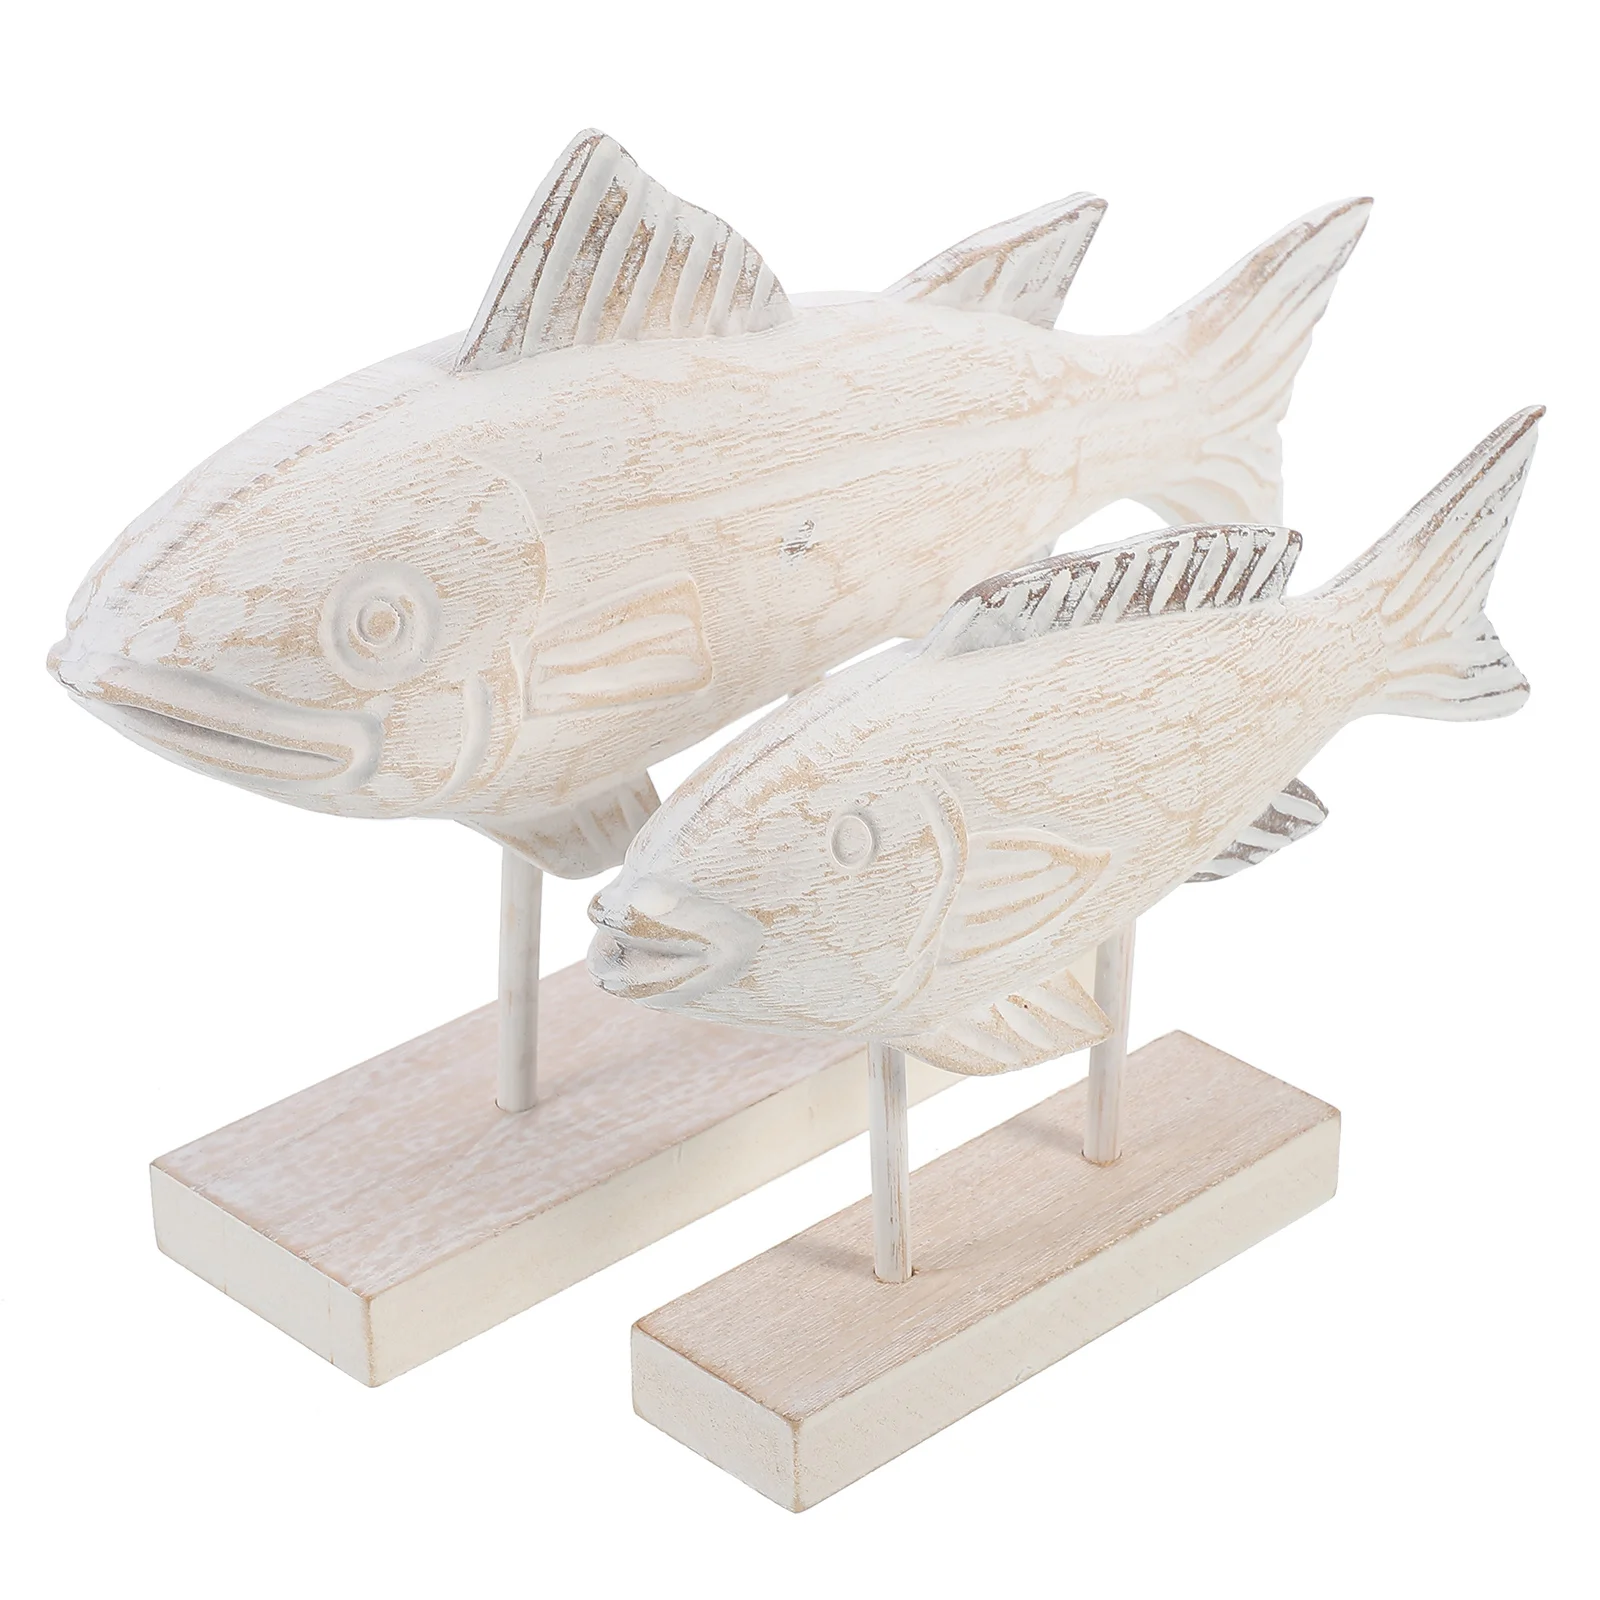 

Fish Ornament Hand Carved Sculpture Rustic Wood Wooden Statue Decor Handmade Adornment Handcrafts Toy